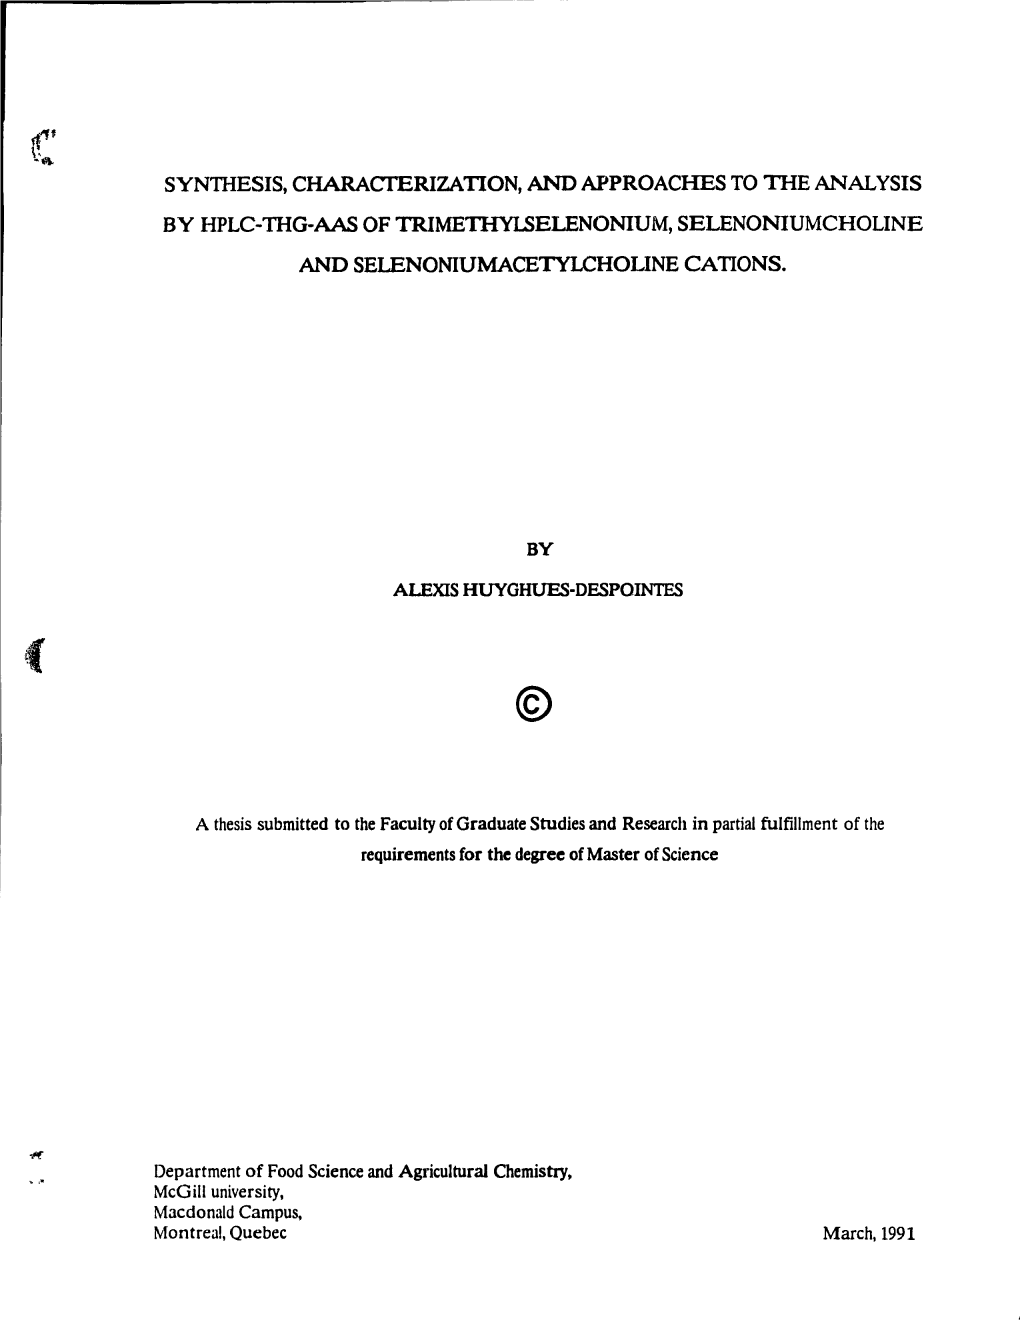 SYNTHESIS, Characferiza TION, and APPROACHES to the ANAL